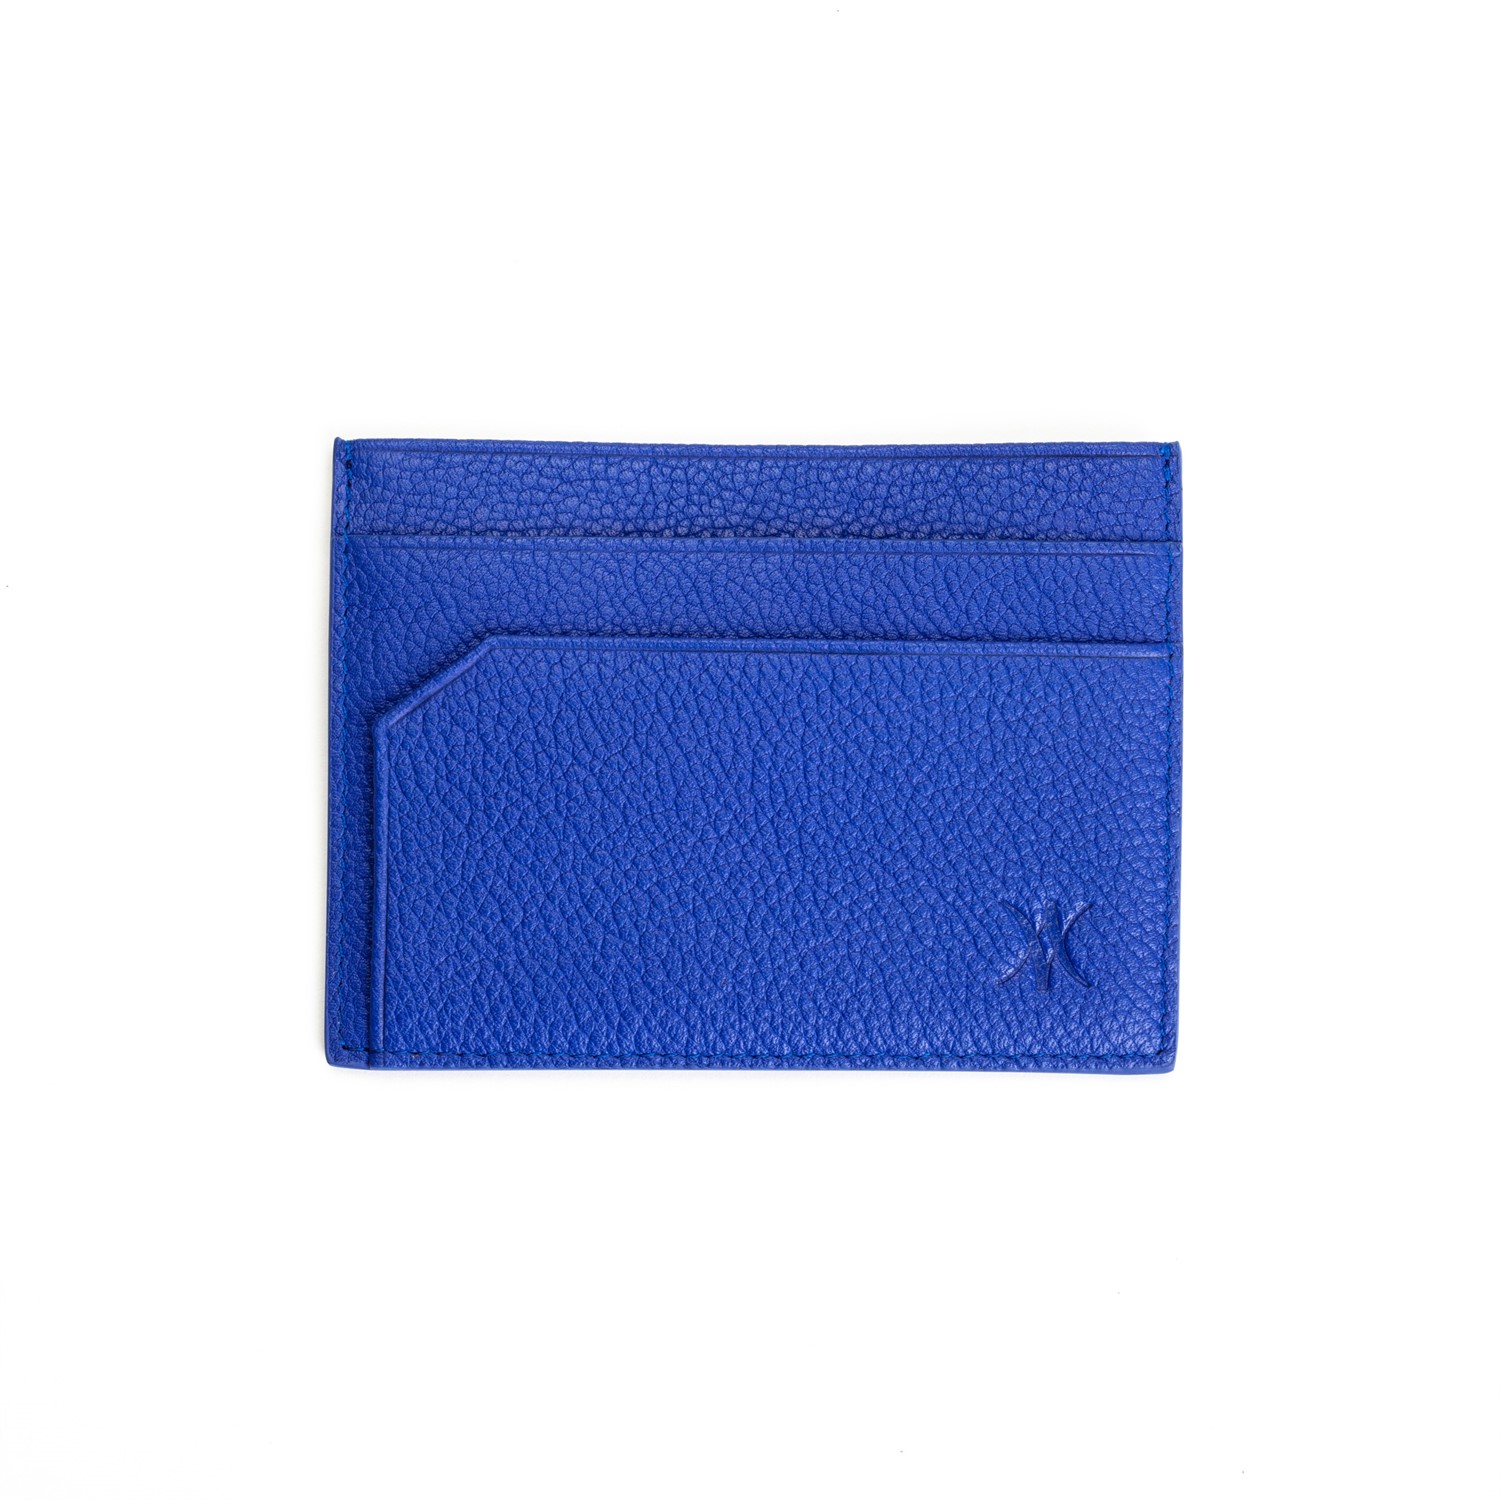 Credit card holder | Small leather goods | Accessories Woman | Vertical ...